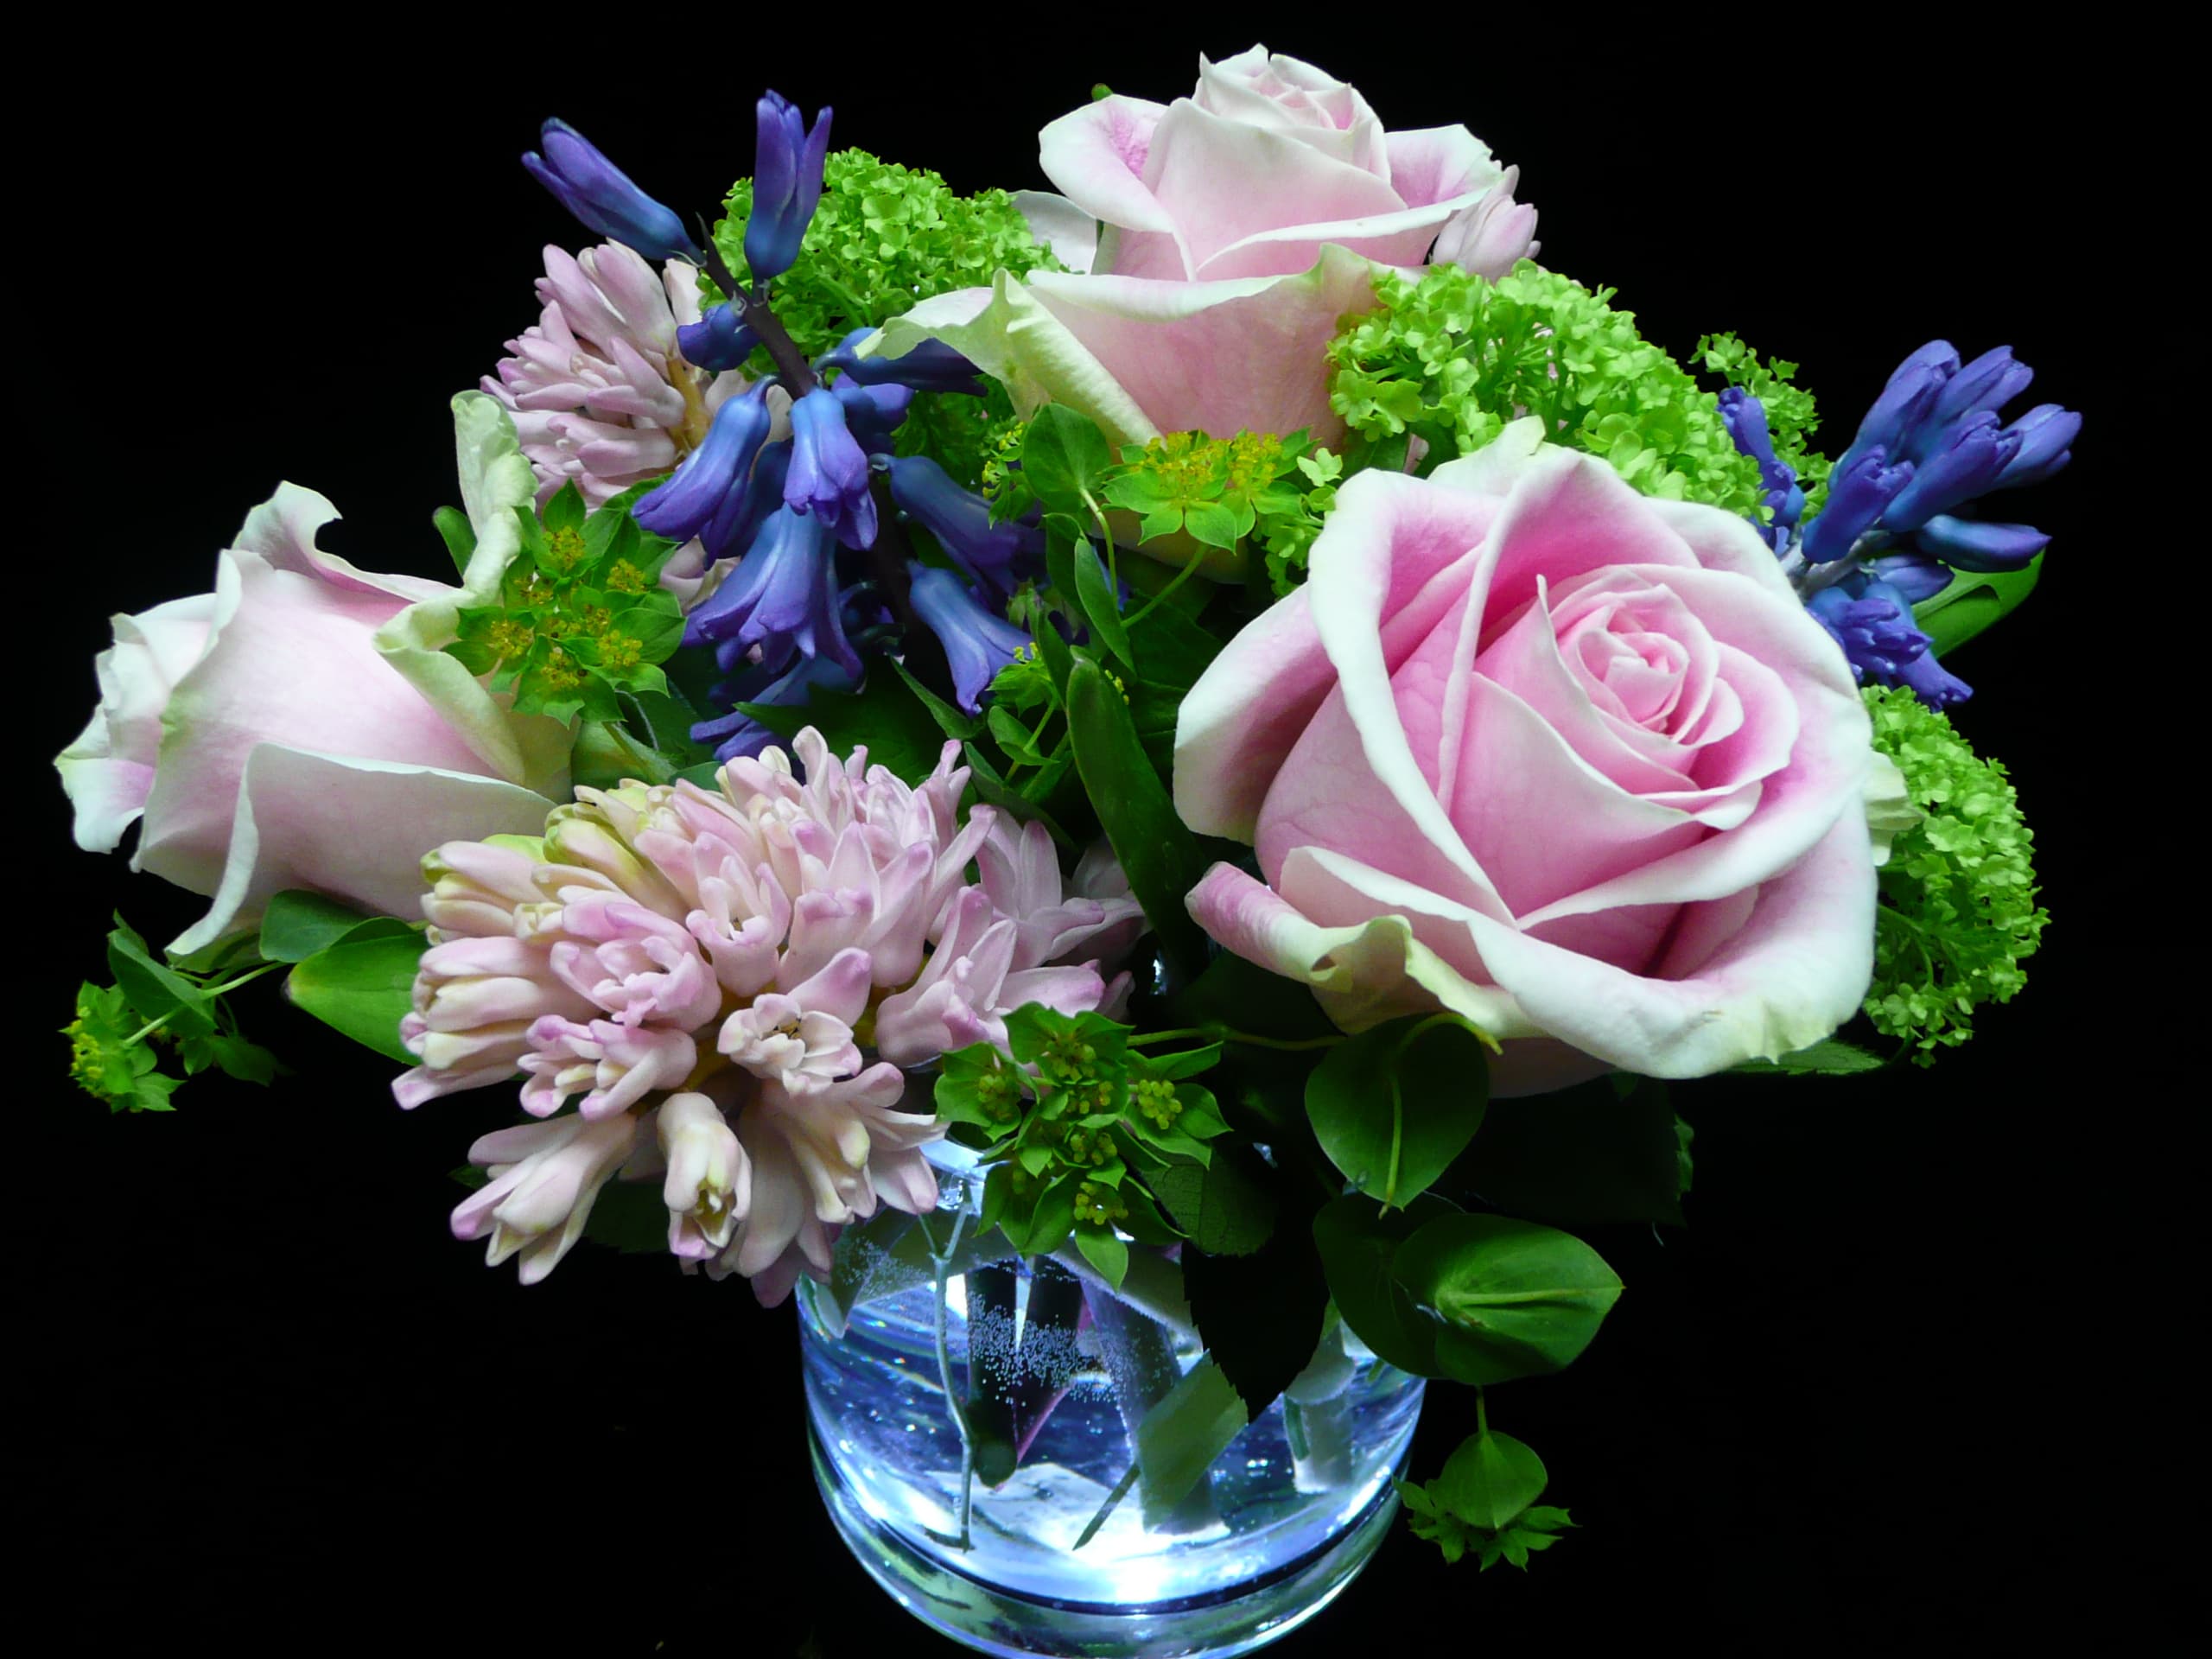 Full Bloom  - Hyacinth, hydrangea, and pink roses make this a sweet sentiment